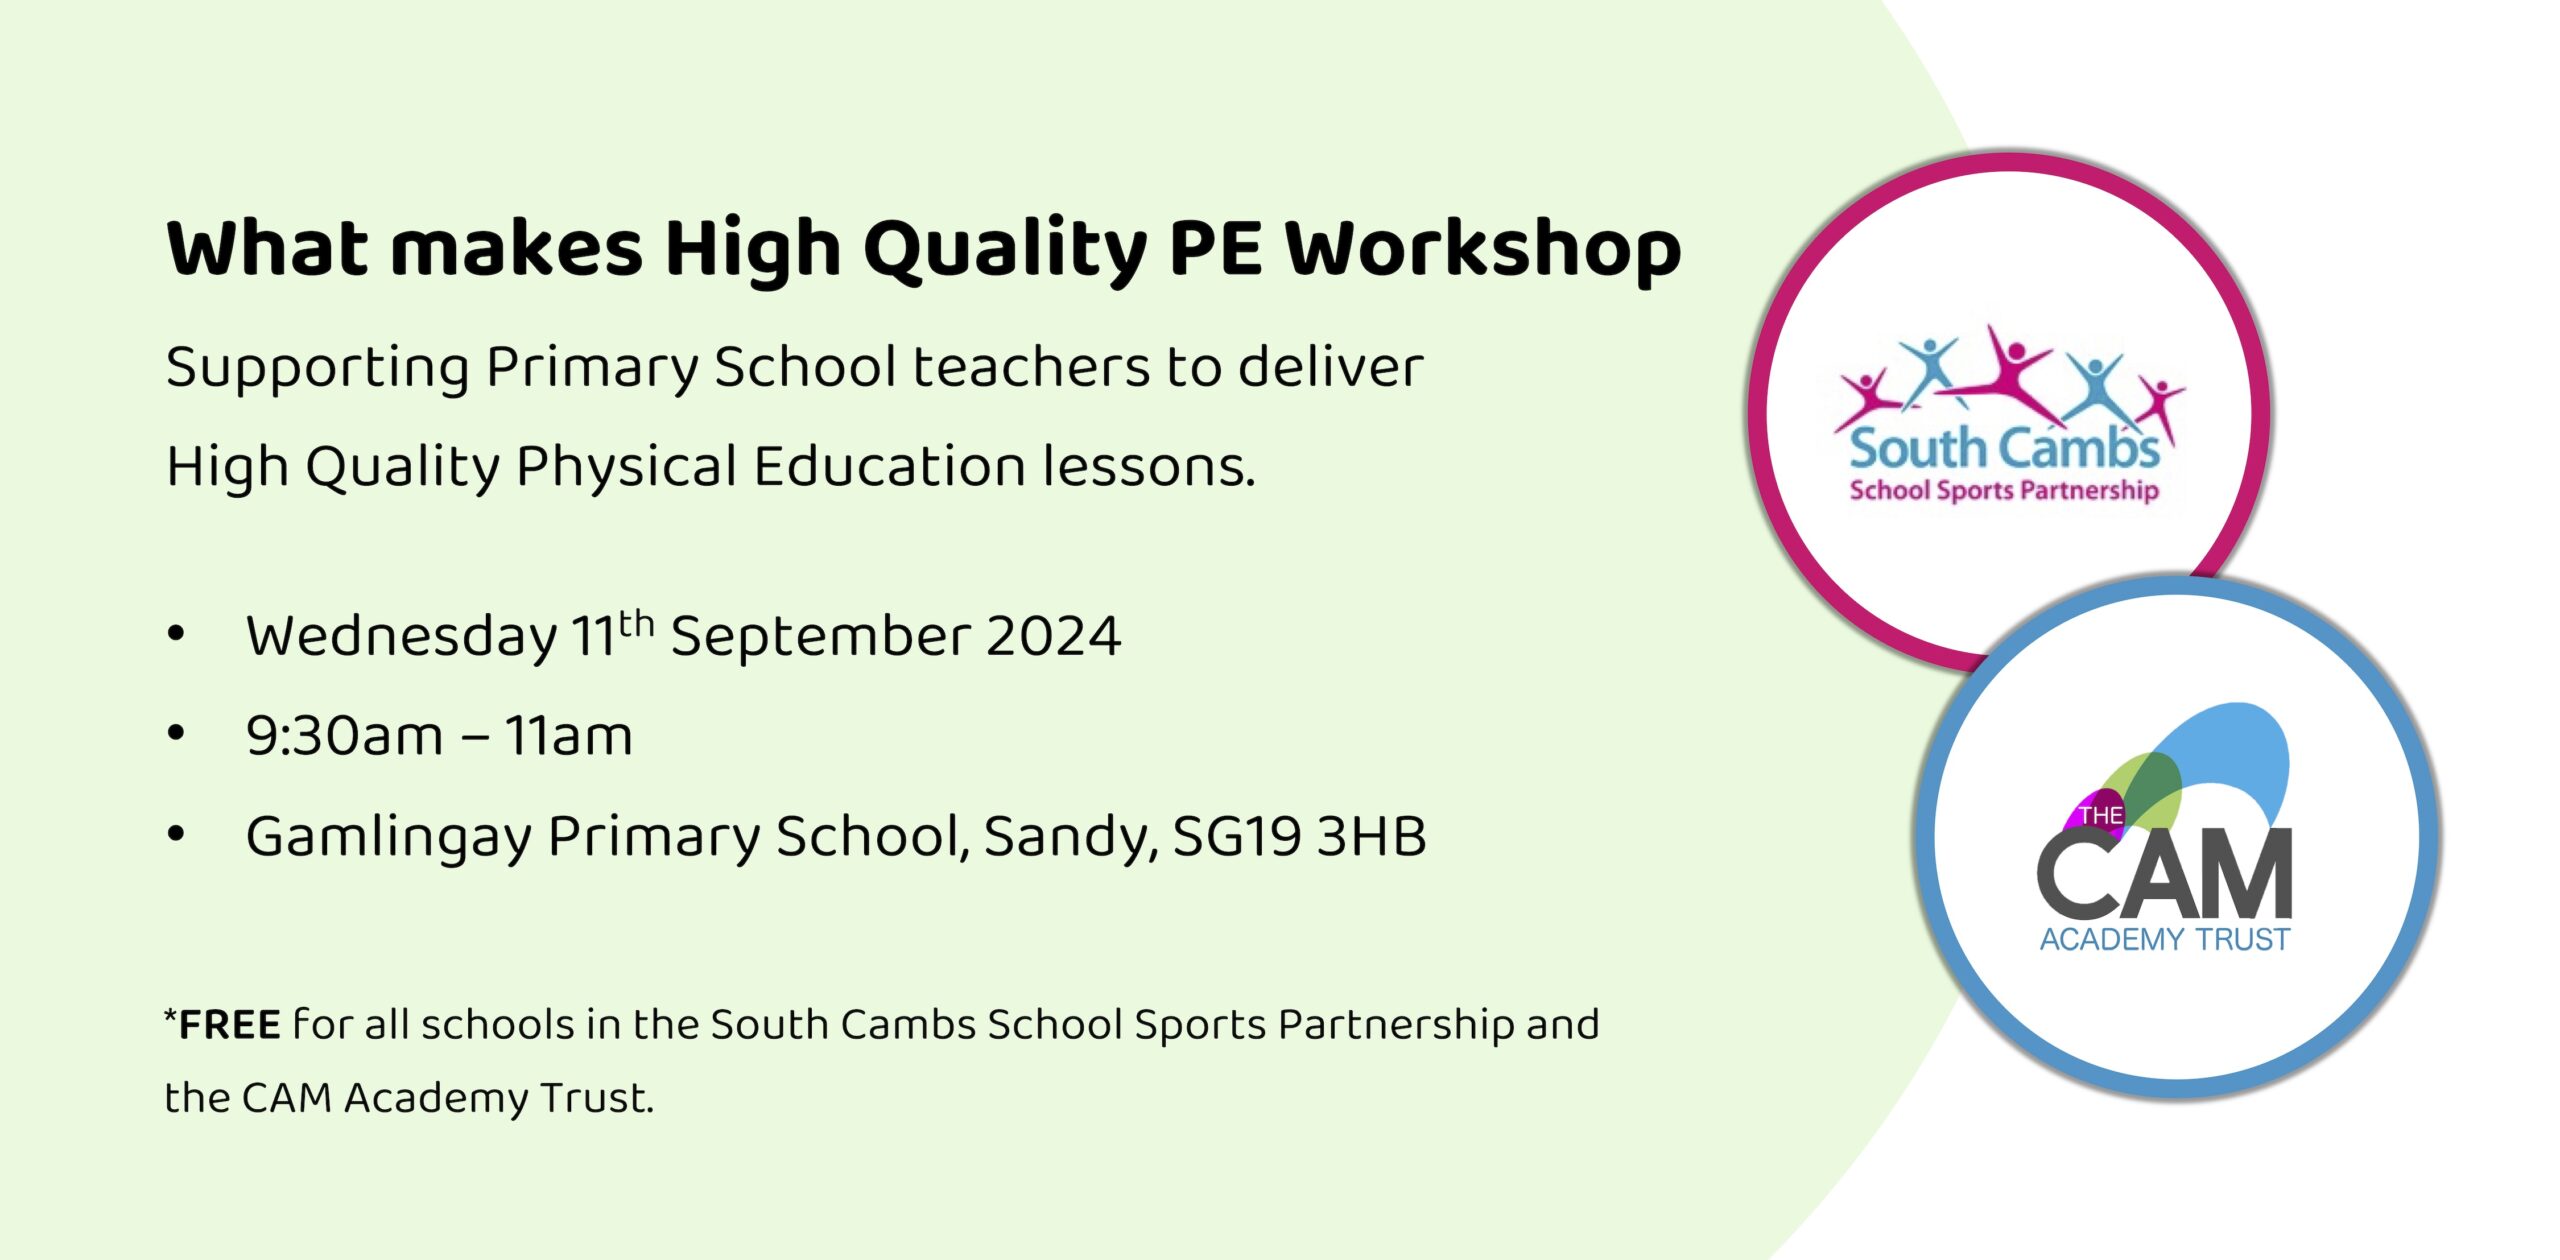 South Cambs | What Makes High Quality PE